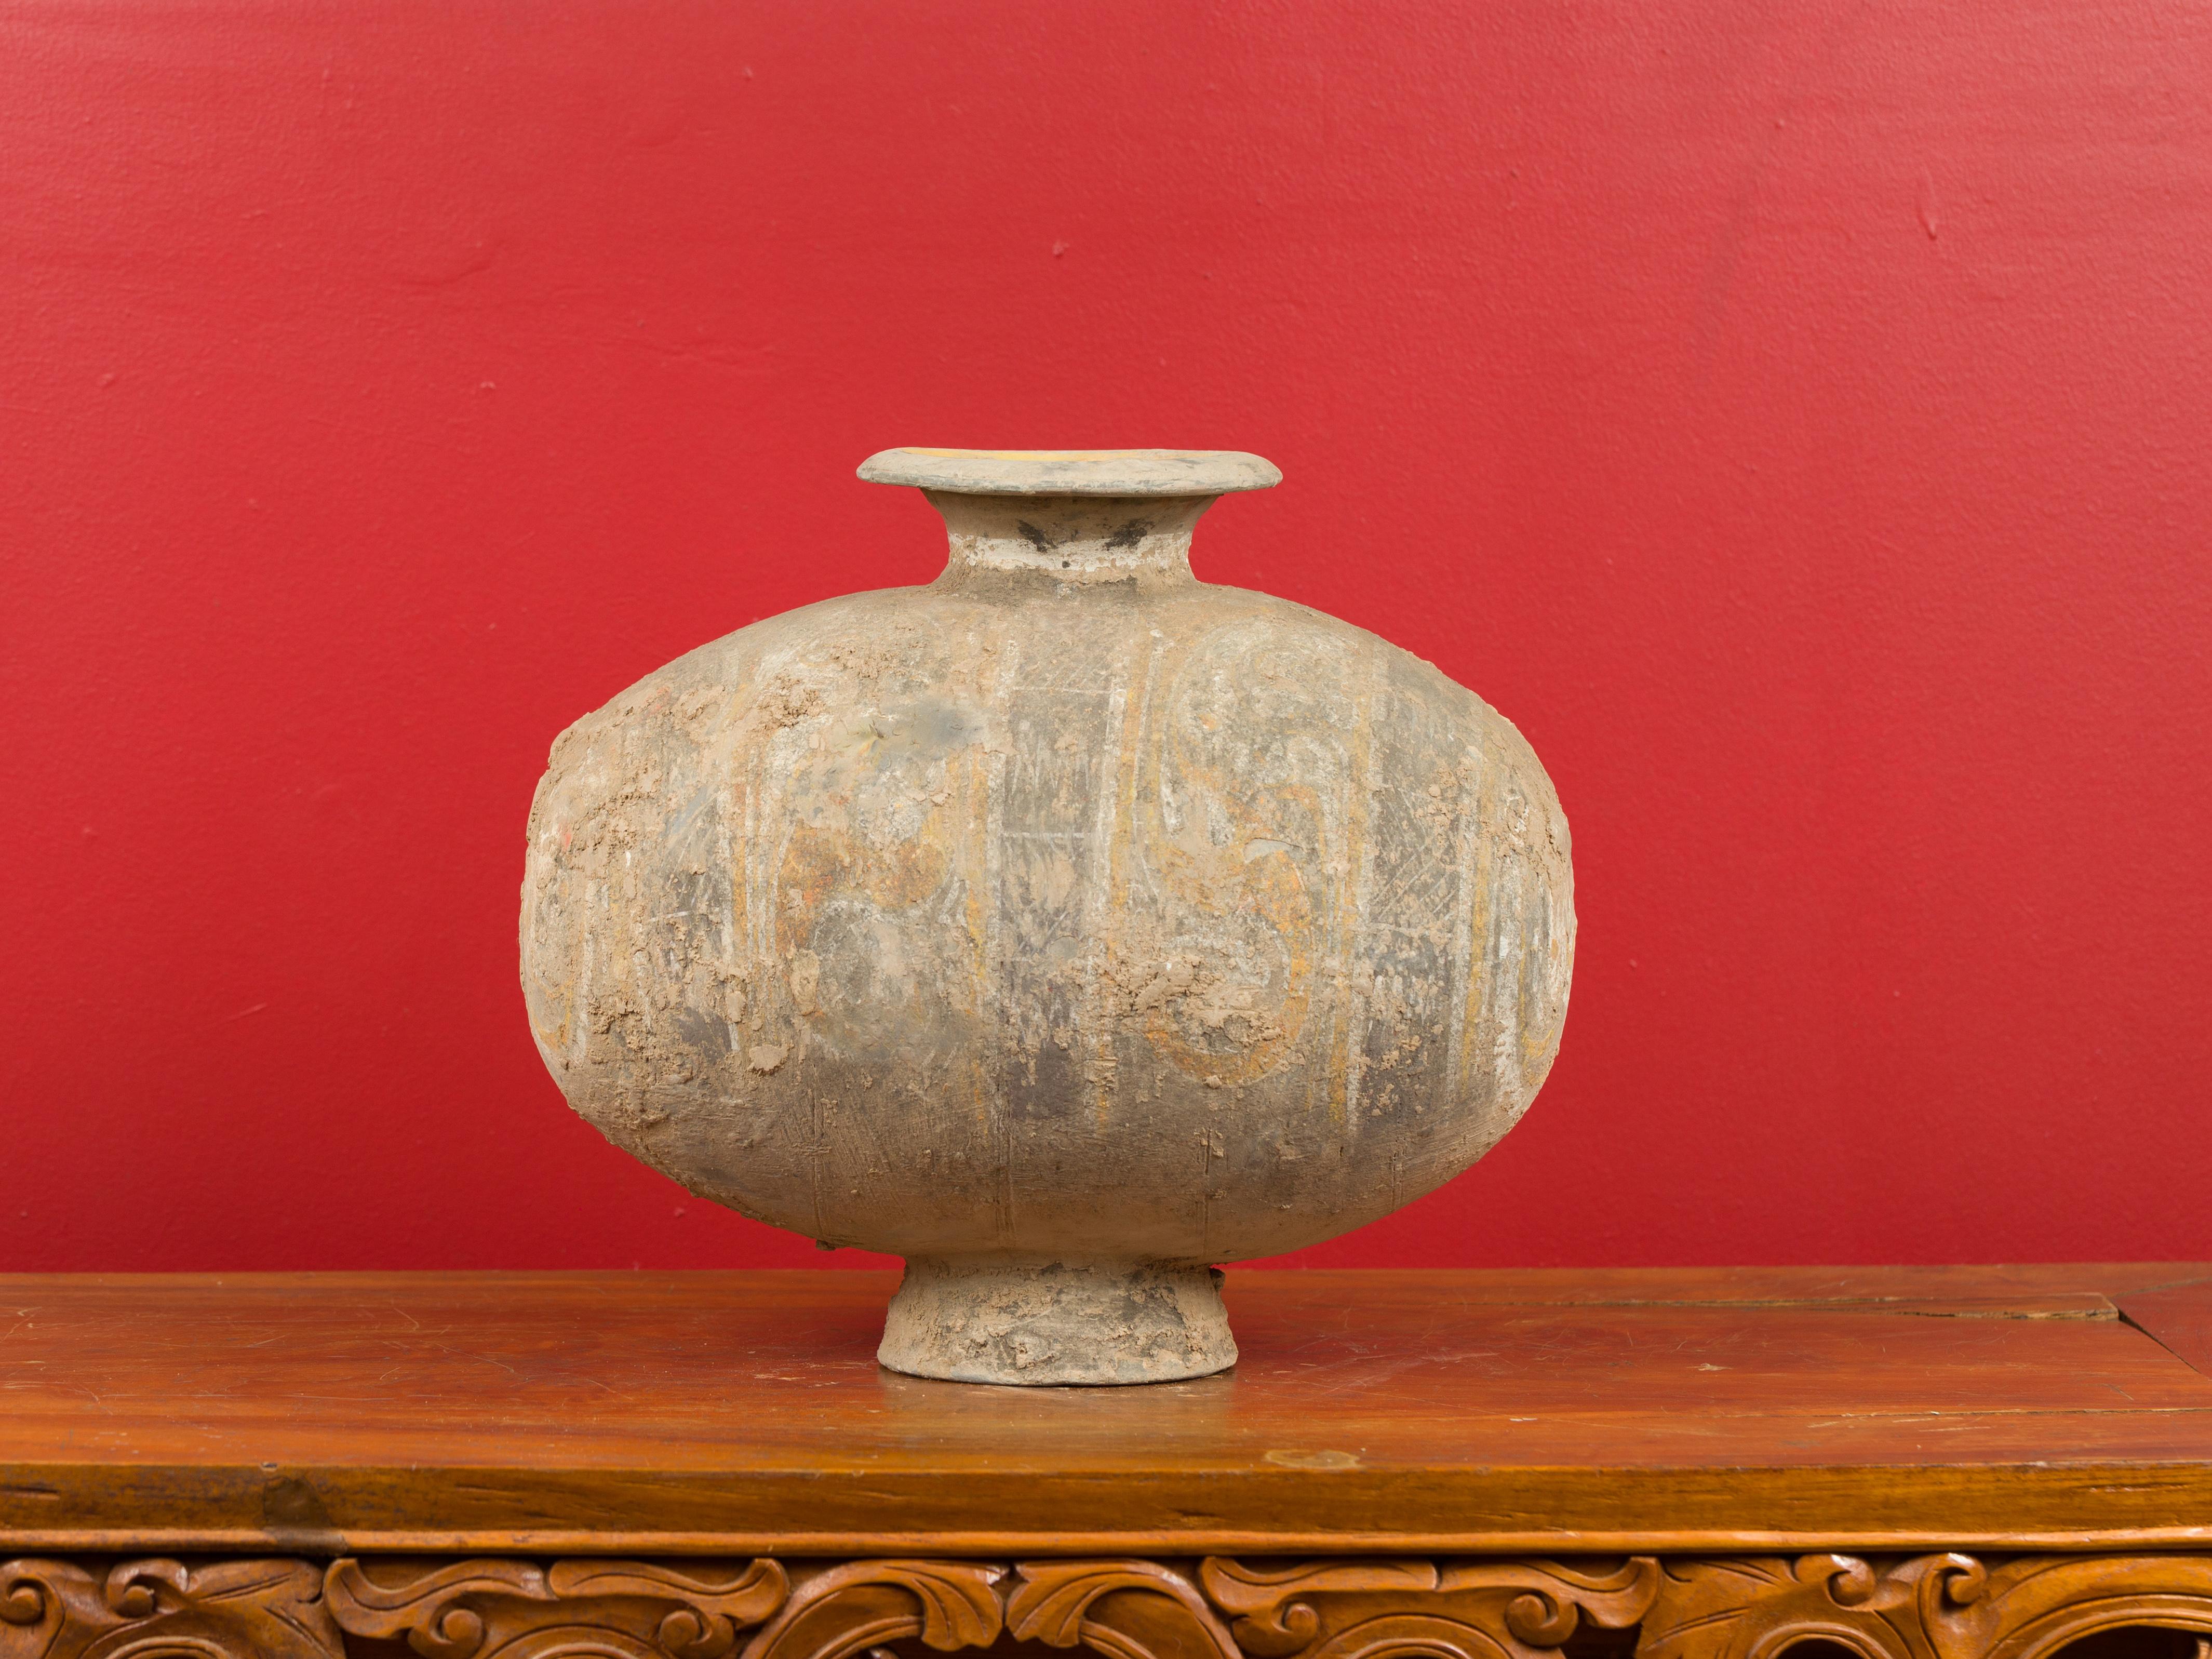 A Chinese Han Dynasty terracotta silk cocoon jar circa 206 BC-220 AD with original hand-painted décor and nicely weathered patina with deposits on the surface. Born in China, this antique jar adopts a silk cocoon shape, relating to the silk industry